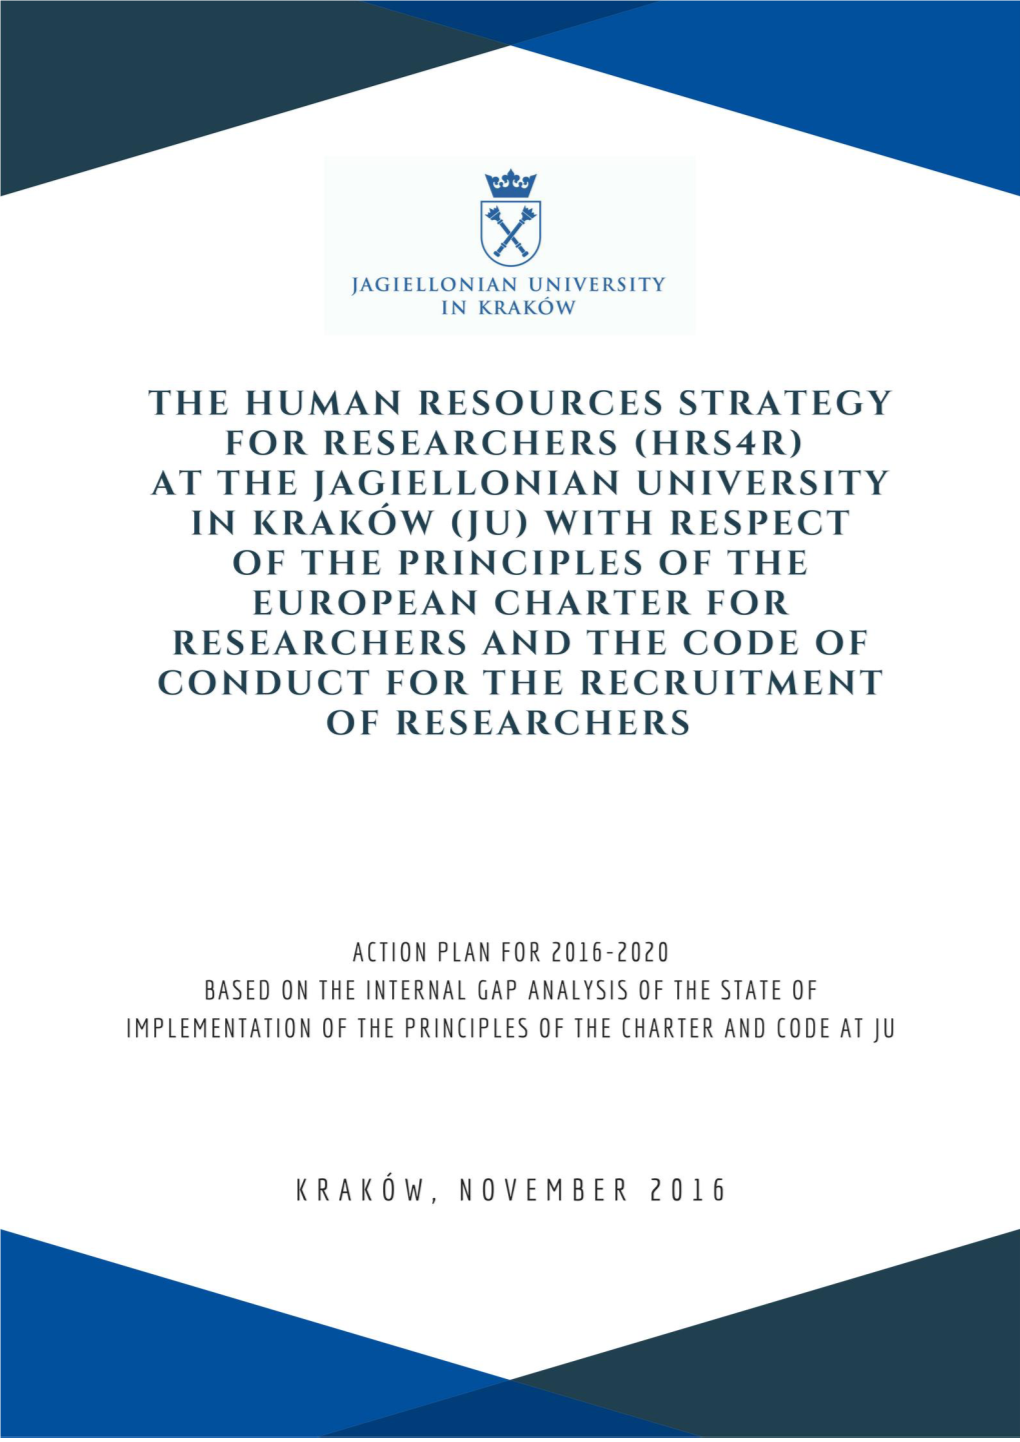 Pdf the Human Resources Strategy for Researchers at the Jagiellonian University